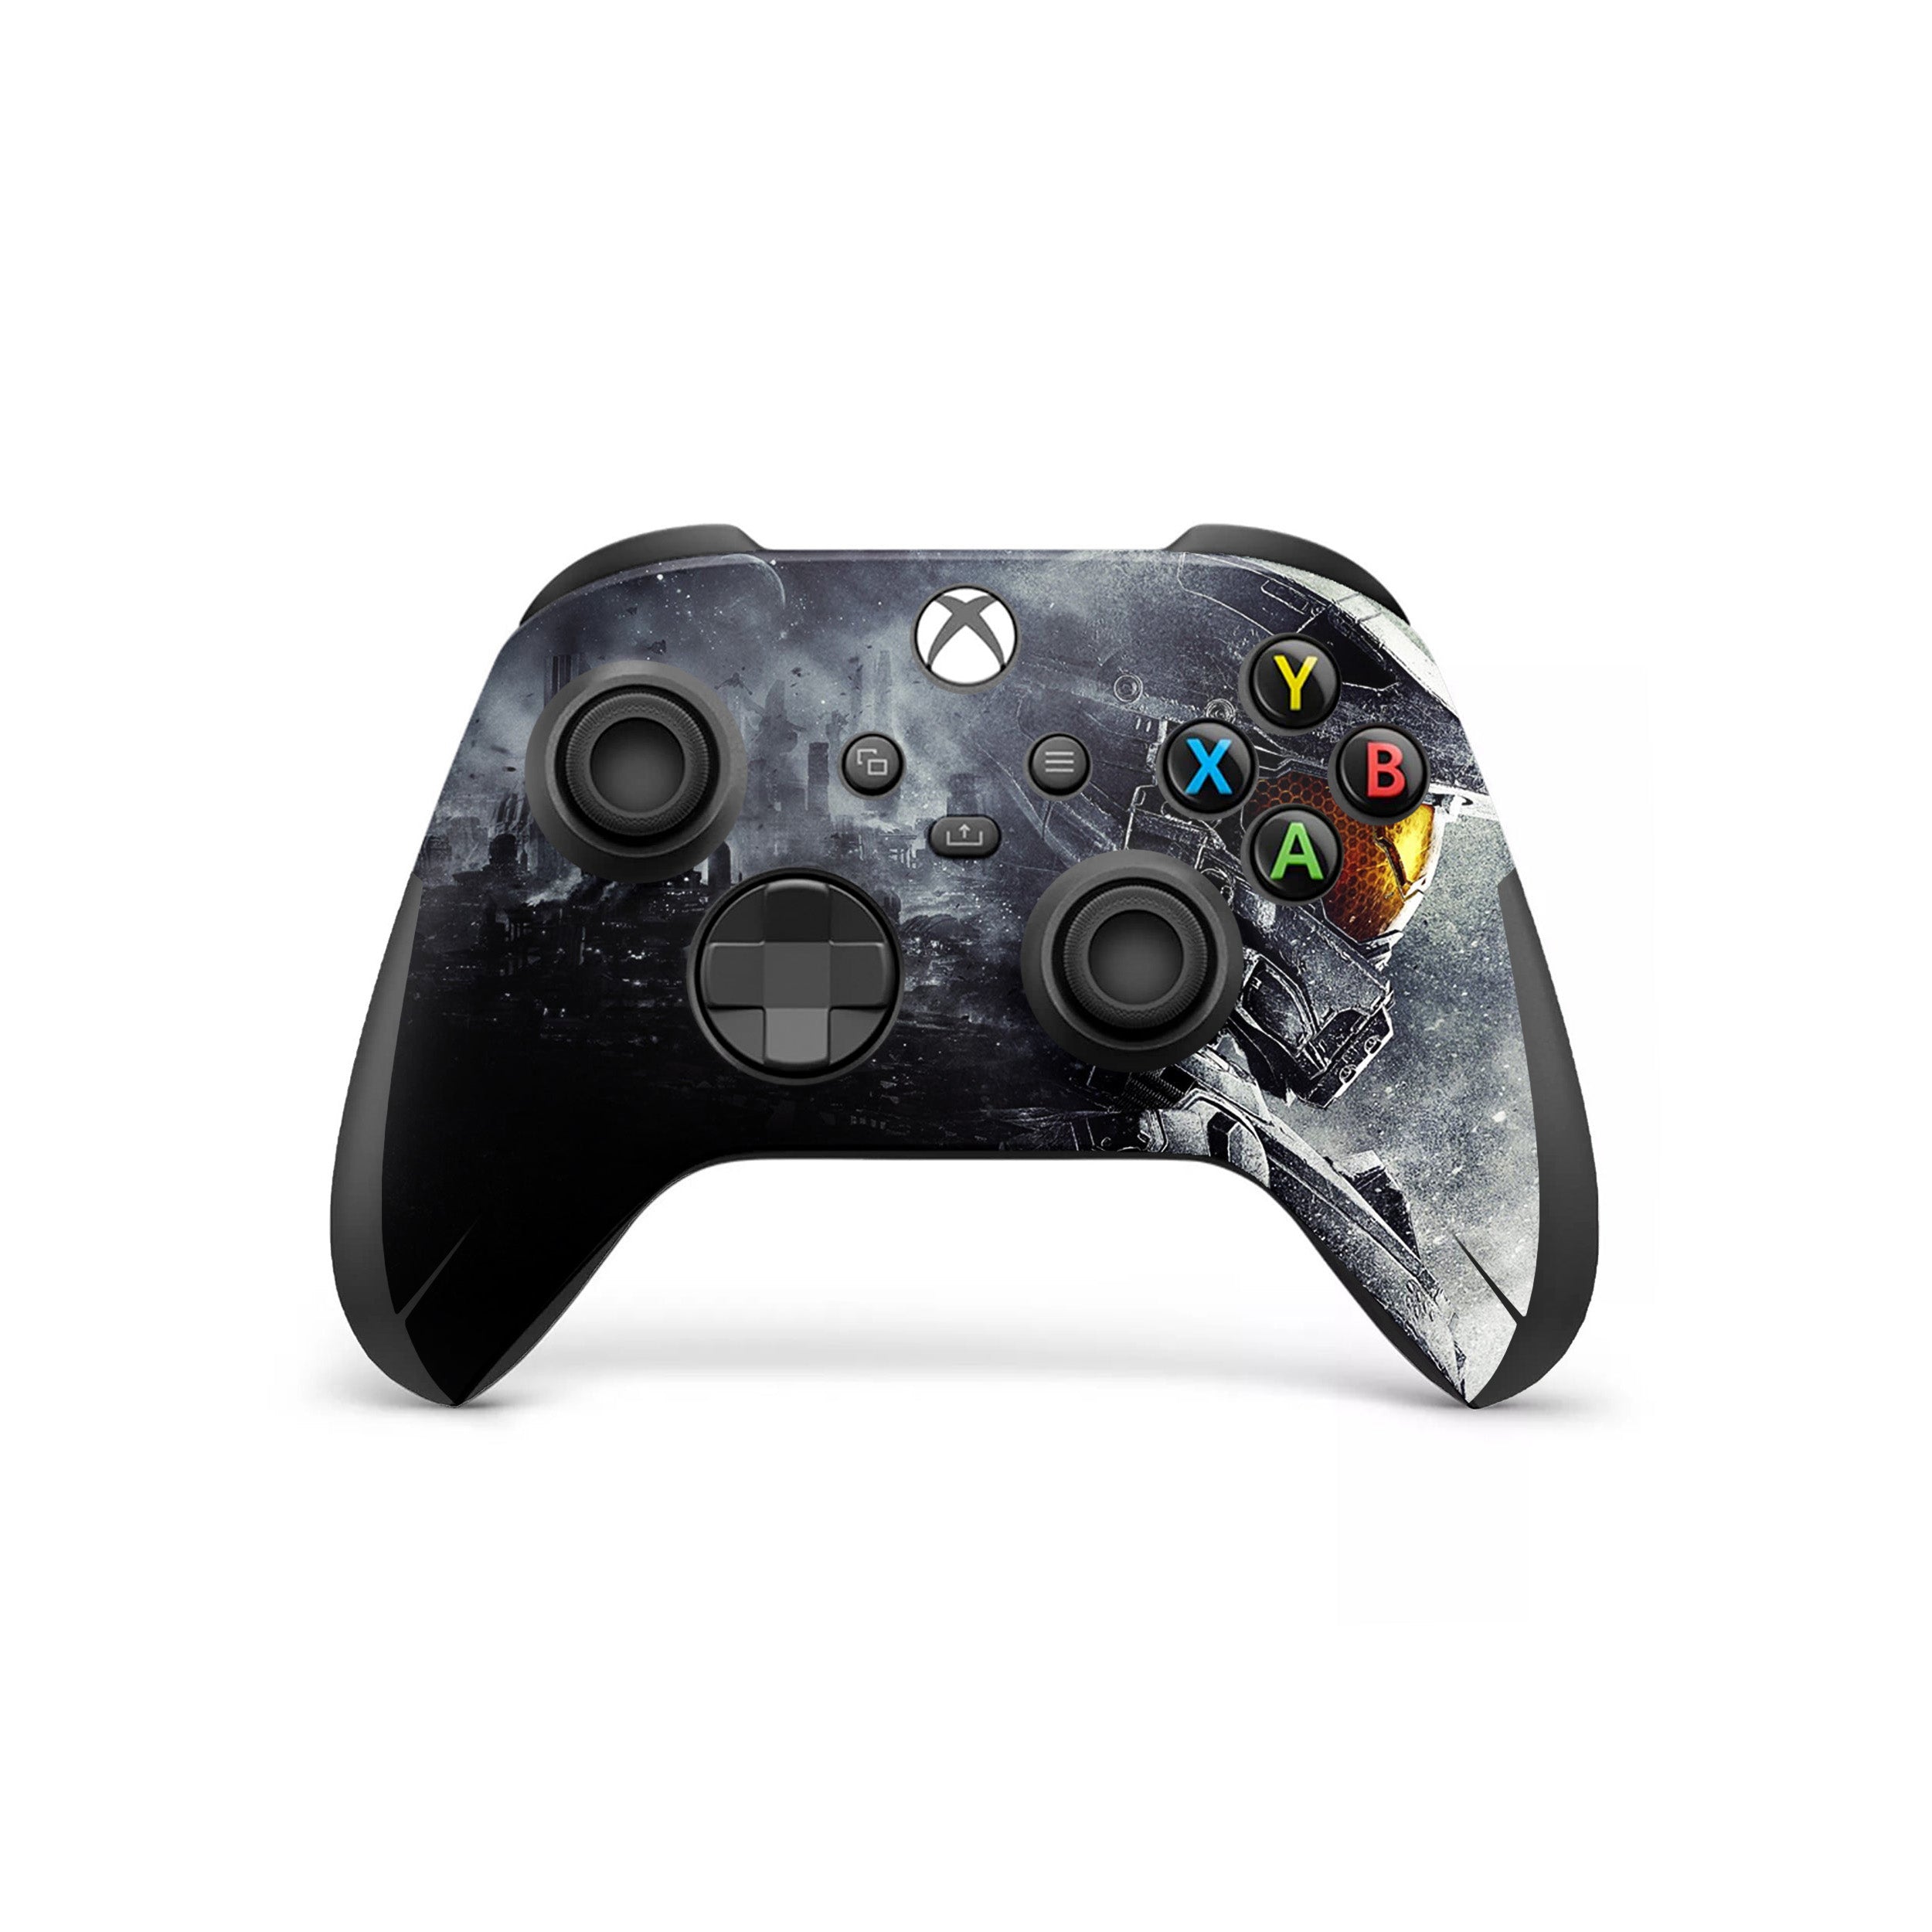 A video game skin featuring a Halo design for the Xbox Wireless Controller.